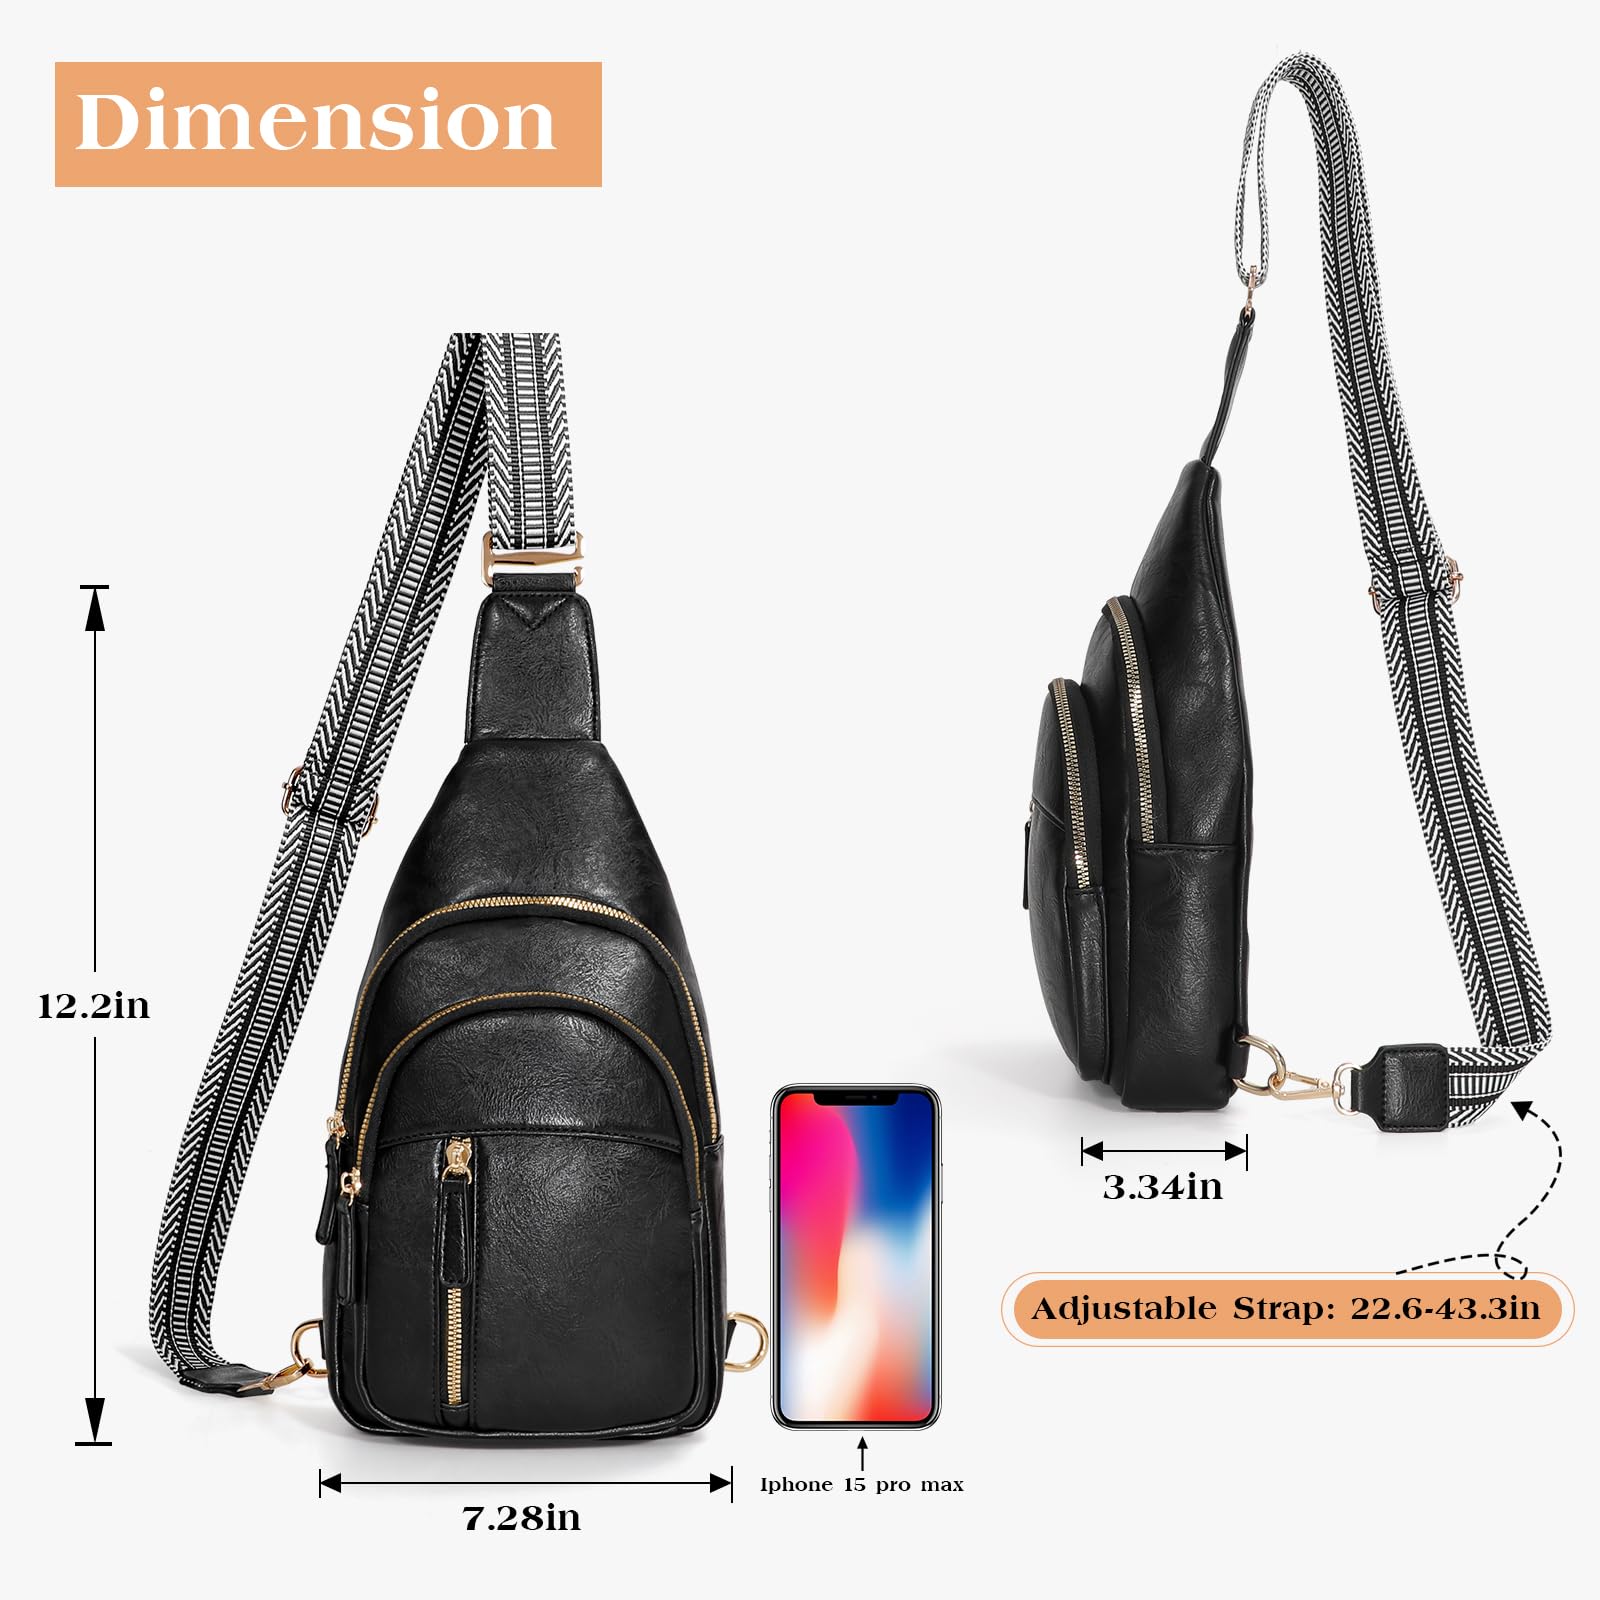 SUOSDEY Sling Bags for Women Crossbody Leather Sling Backpack Chest Bag Should Bags for Casual Traveling Hiking Cycling